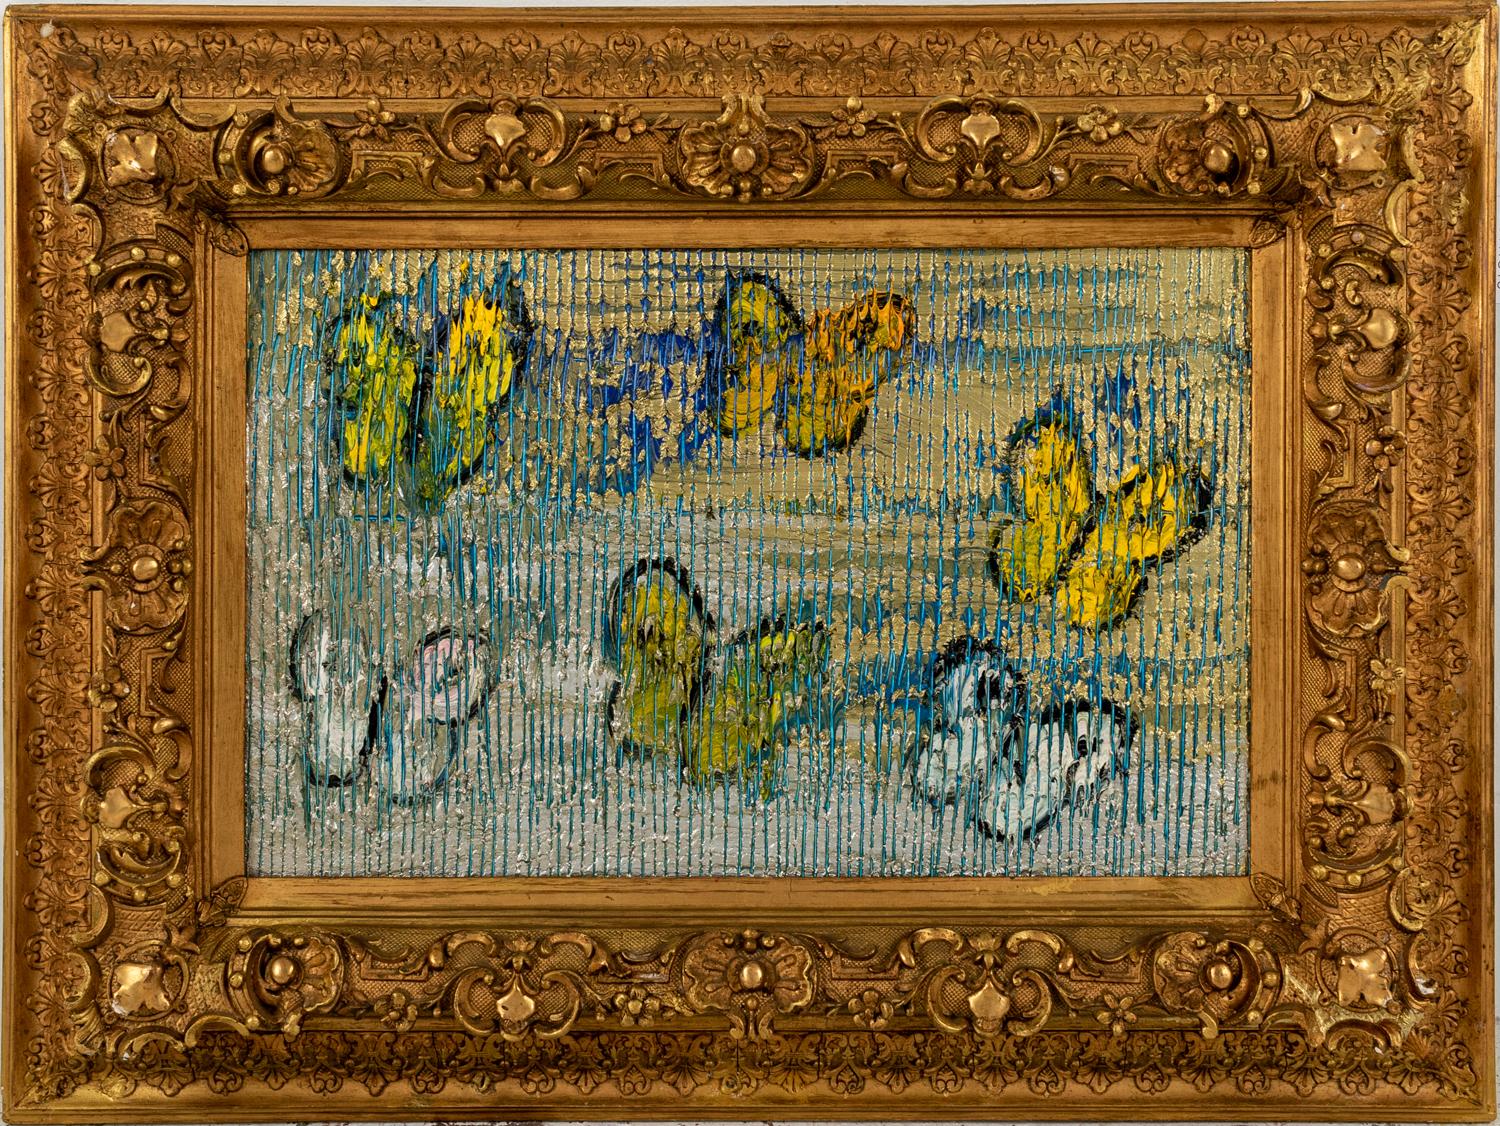 Hunt Slonem "Clamoring" Blue, Silver, & Yellow Metallic Butterflies
Blue and yellow butterflies on a metallic silver blue scored background in gold ornate antique frame

Unframed: 15 x 23.25 inches
Framed: 25 x 33 inches
*Painting is framed - Please